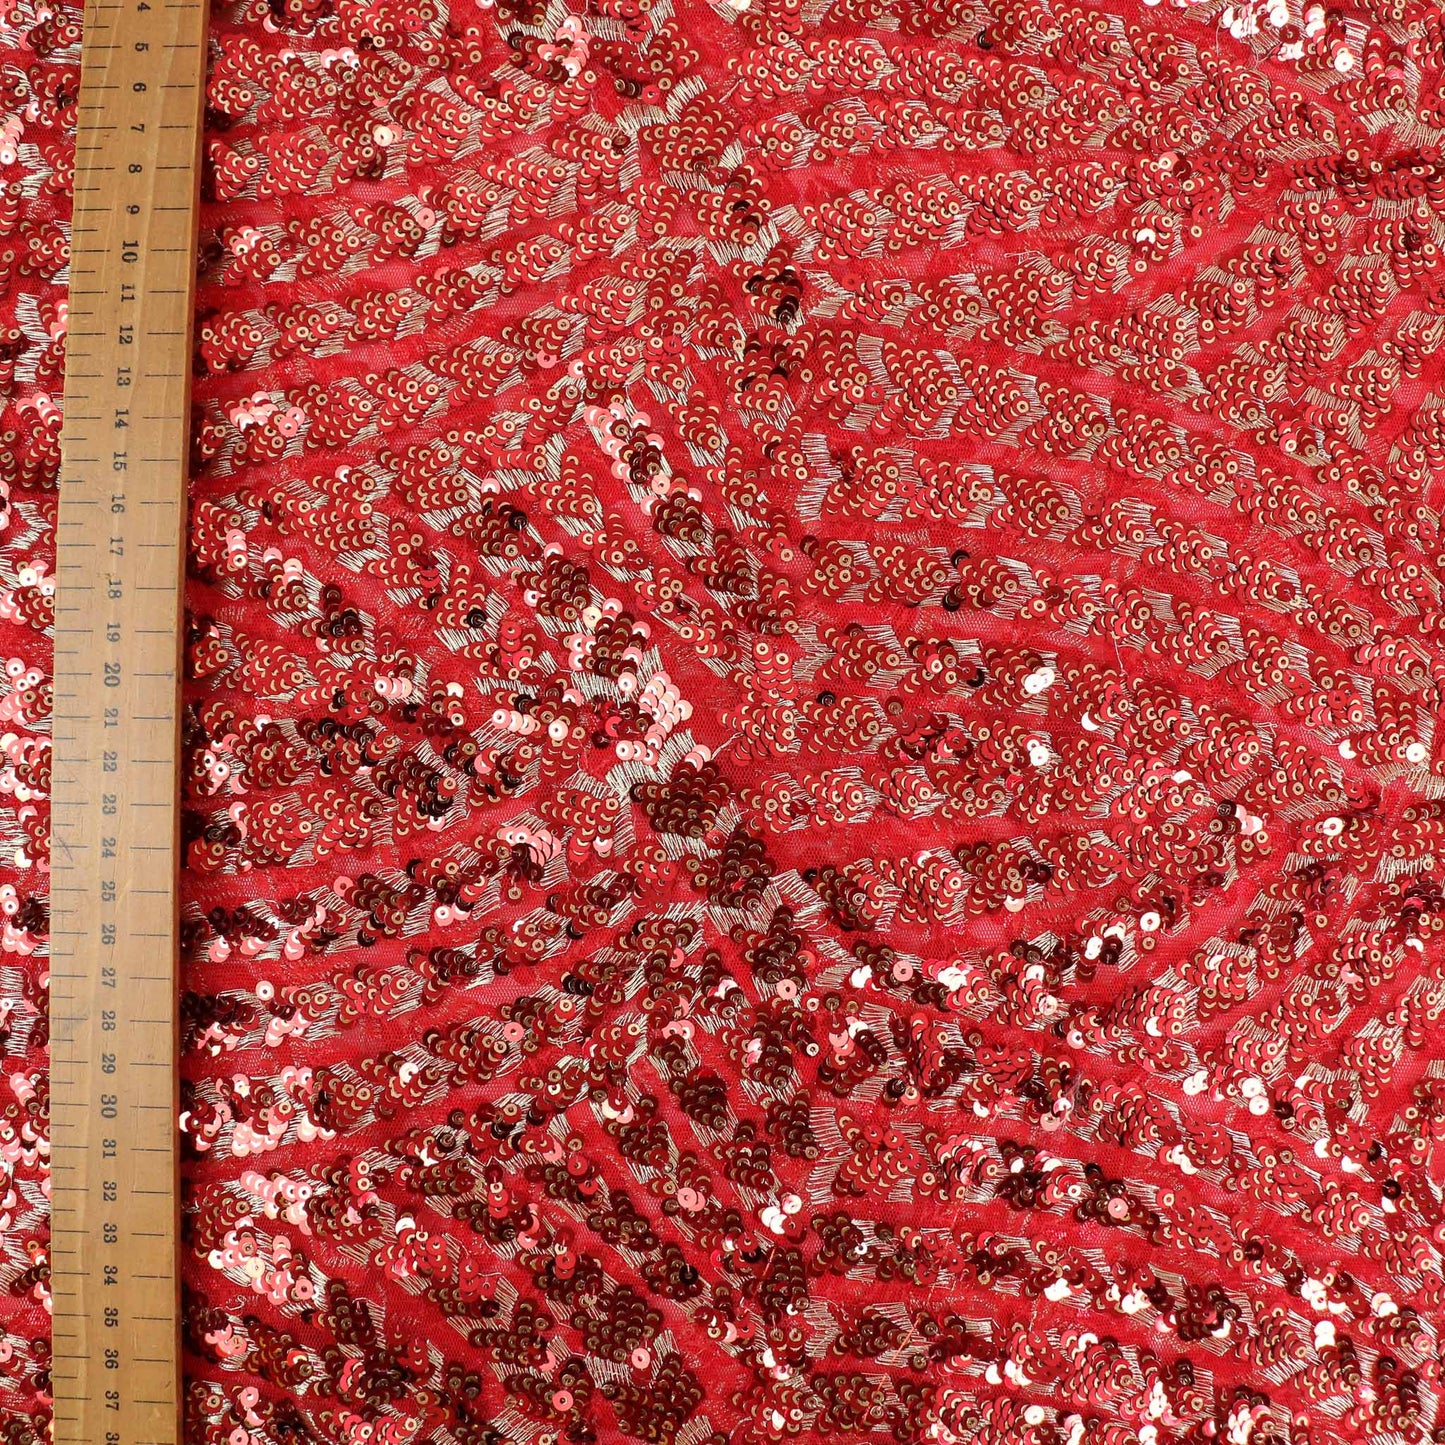 Sequin Fabric - Red, gold